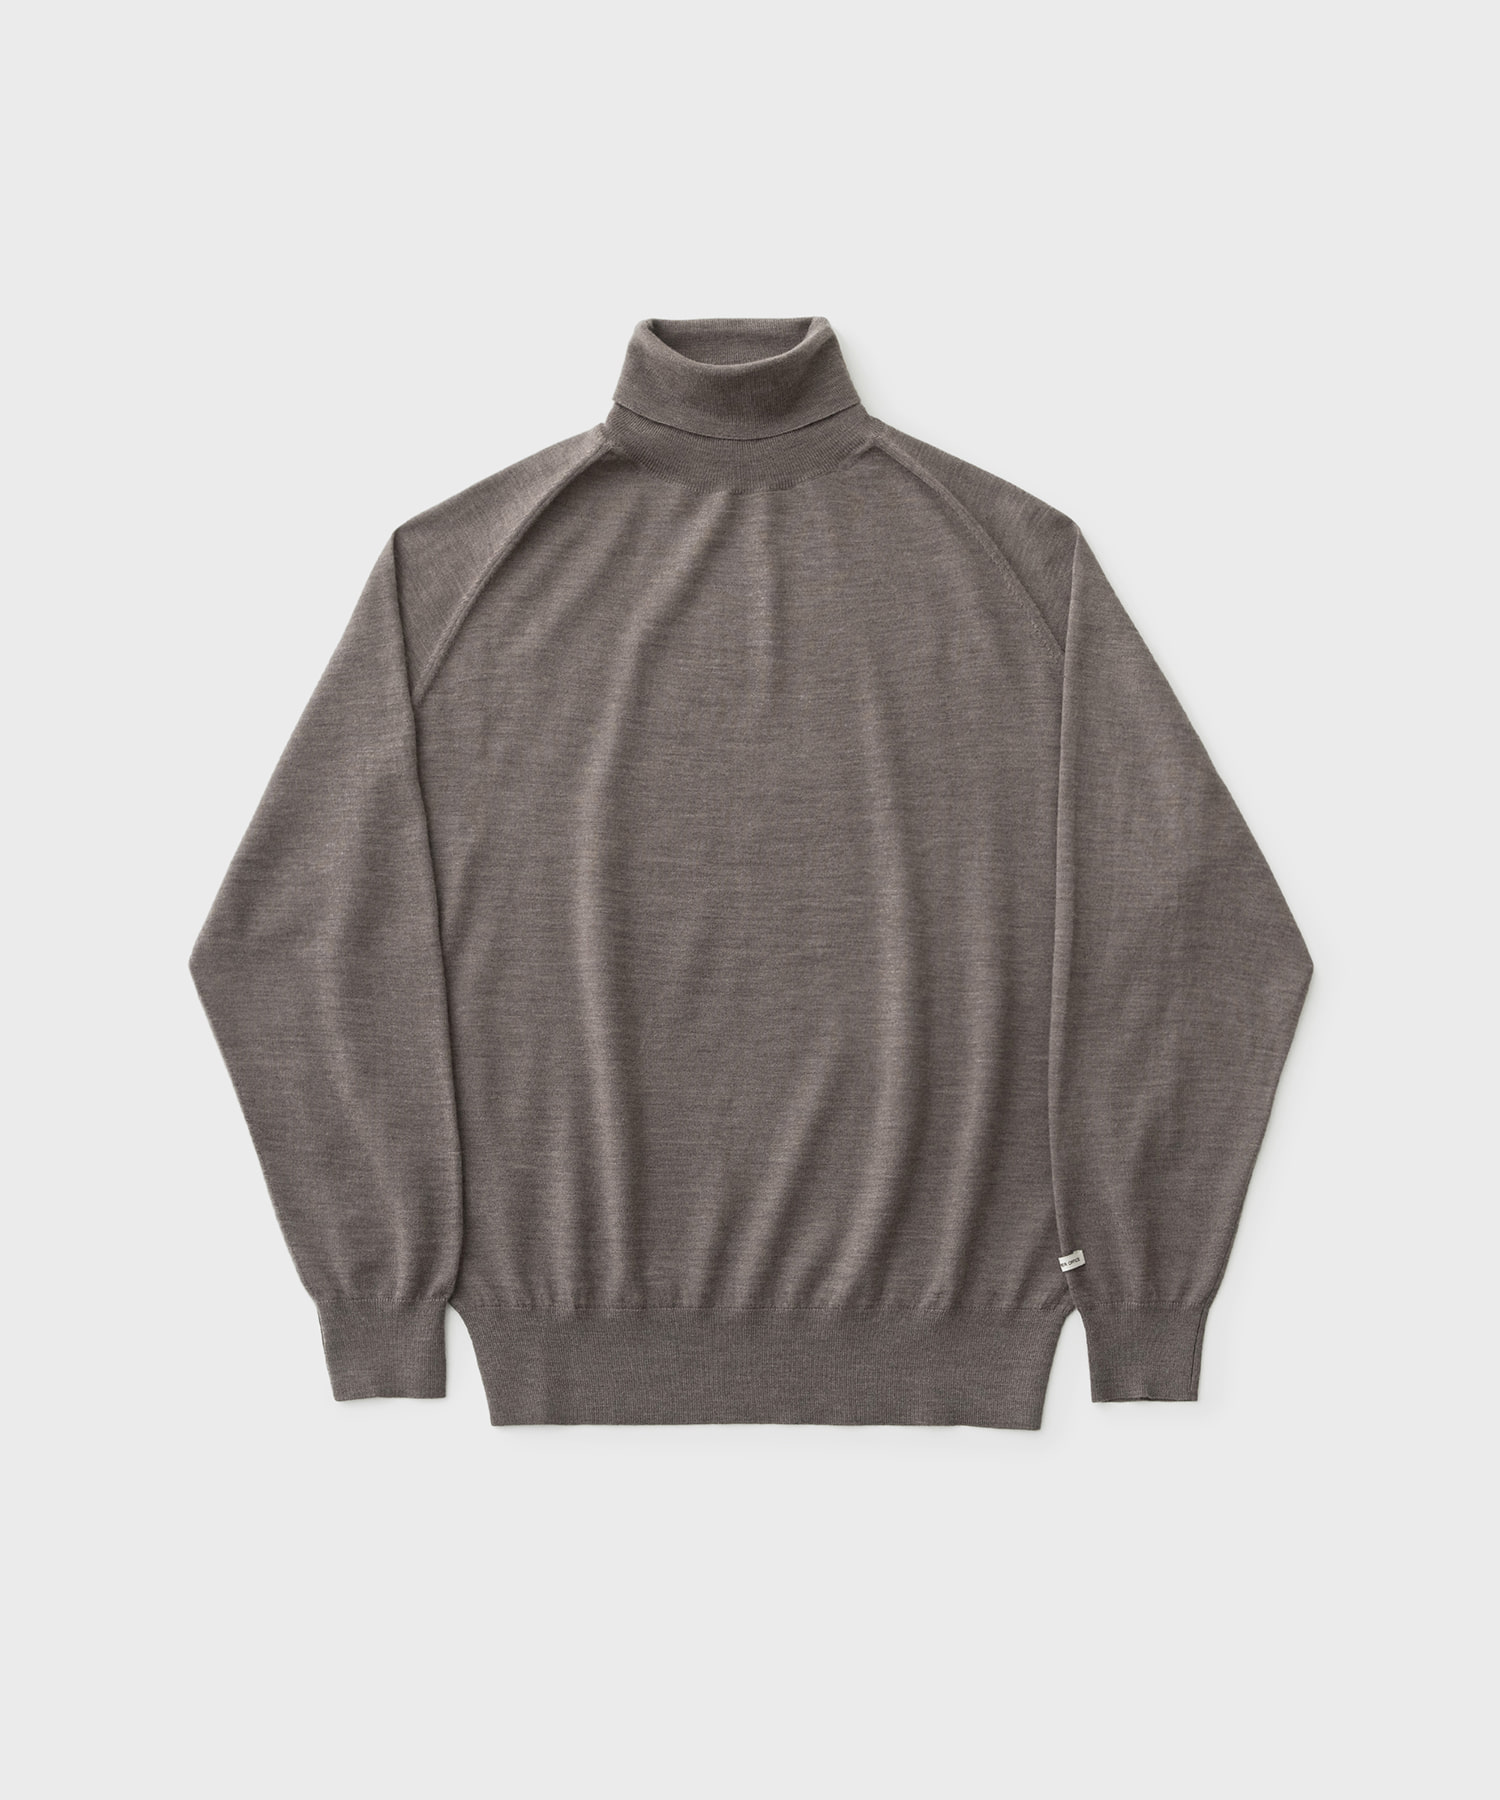 22AW Scape-Turtleneck Knit (Earth)